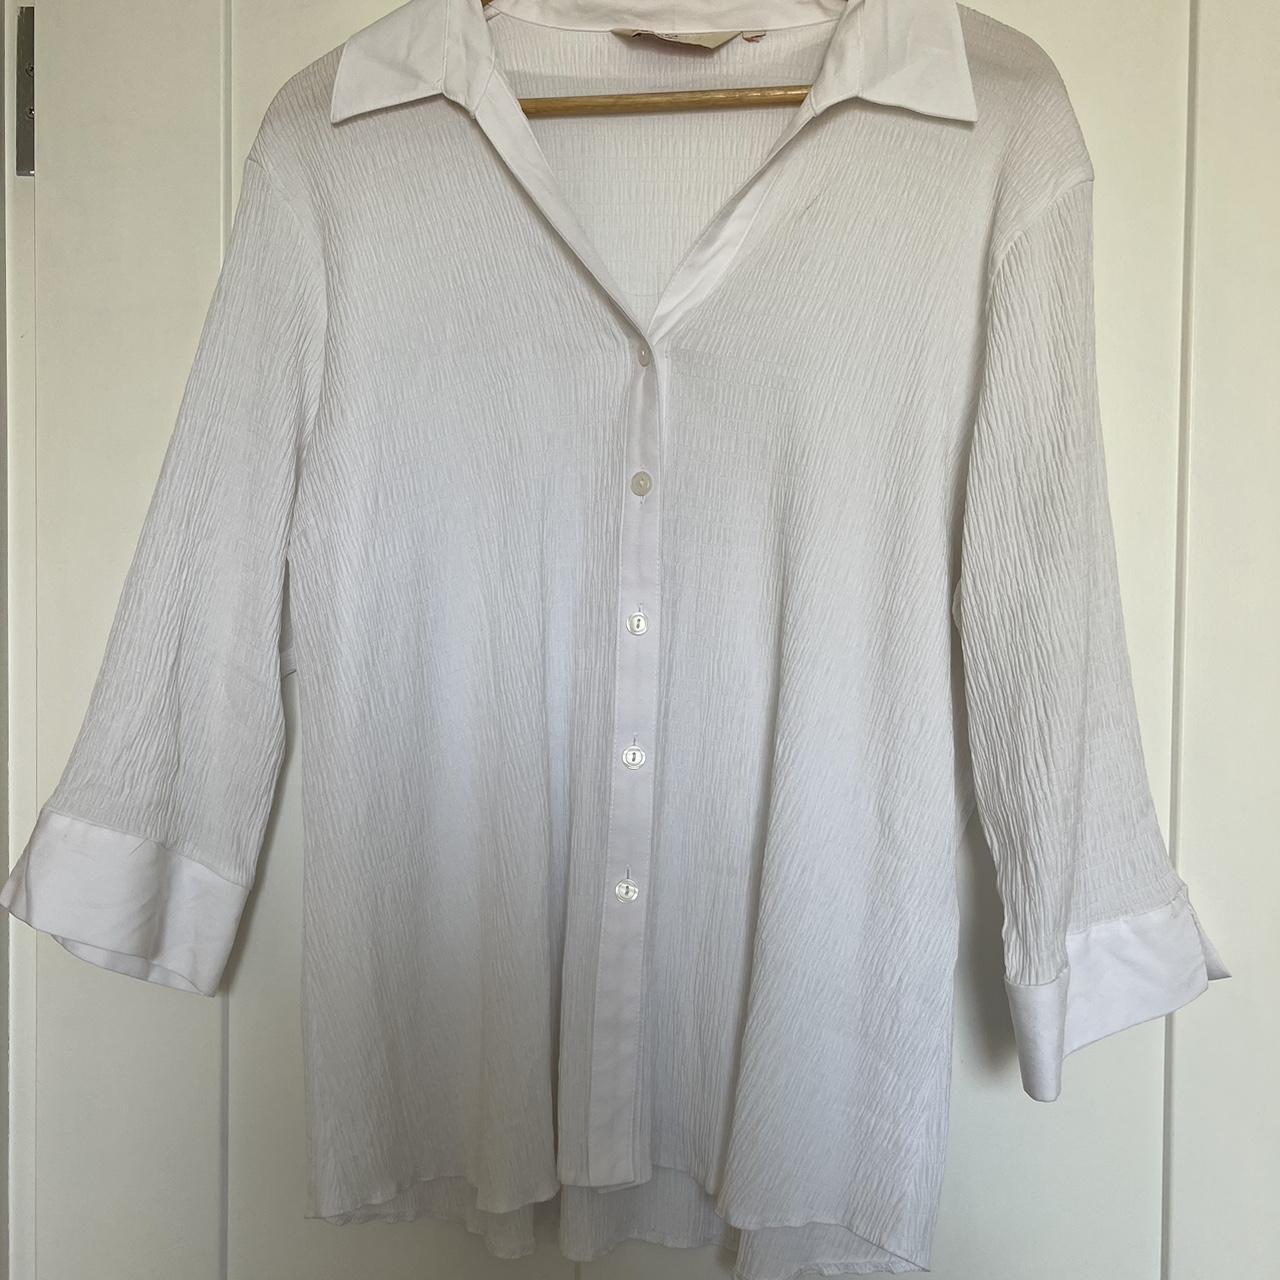 Sheer white button blouse Oversized fit size M - Depop